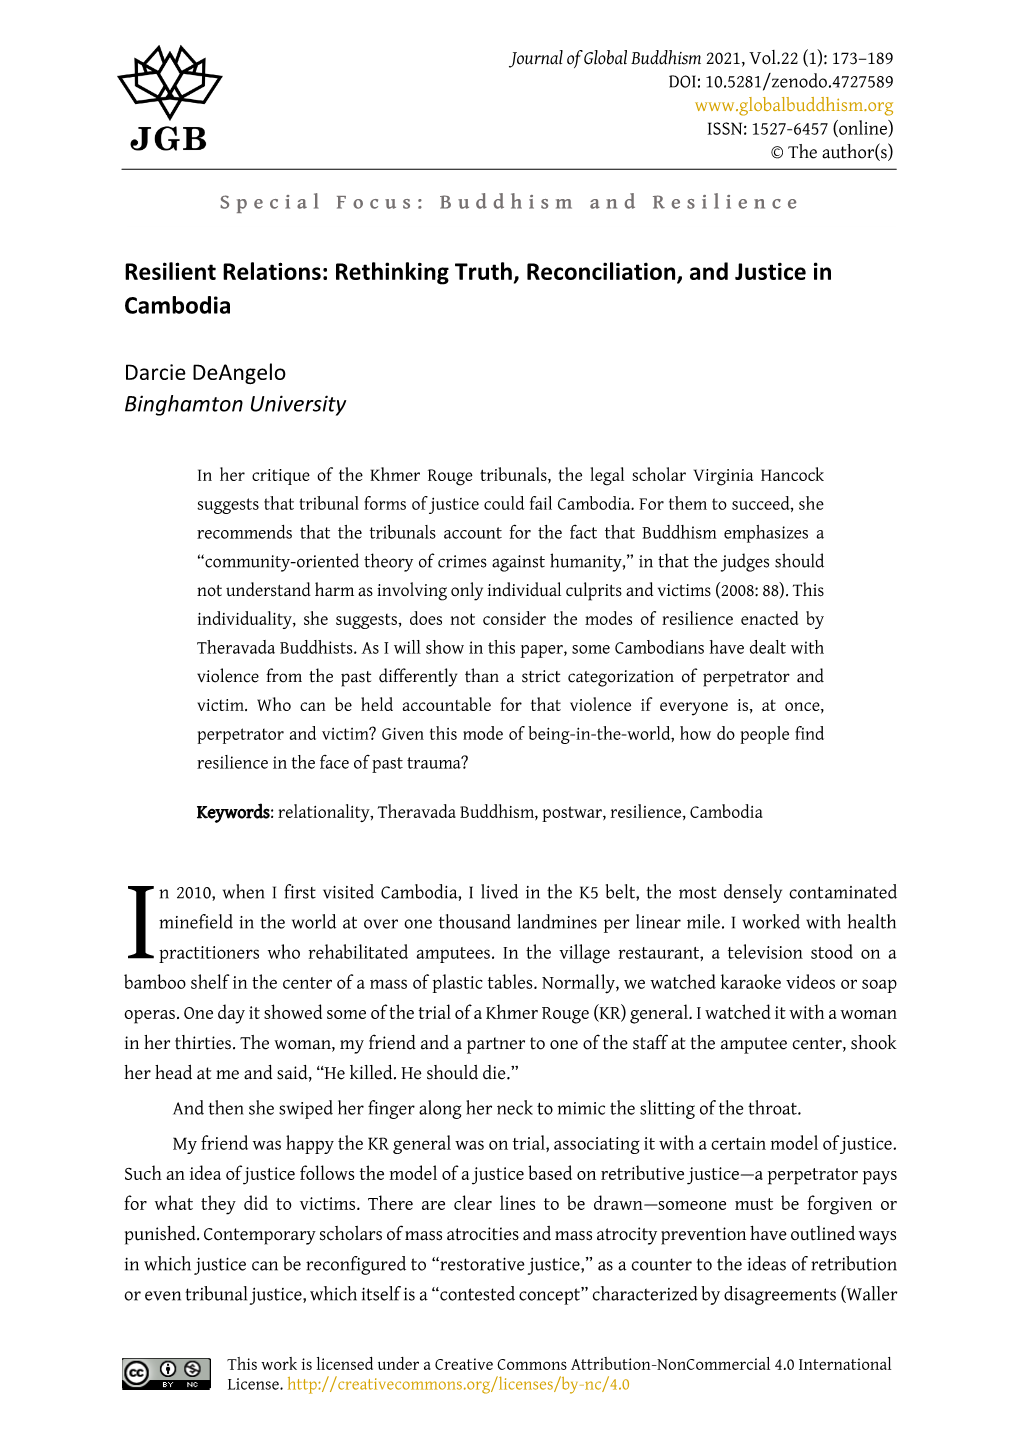 Rethinking Truth, Reconciliation, and Justice in Cambodia